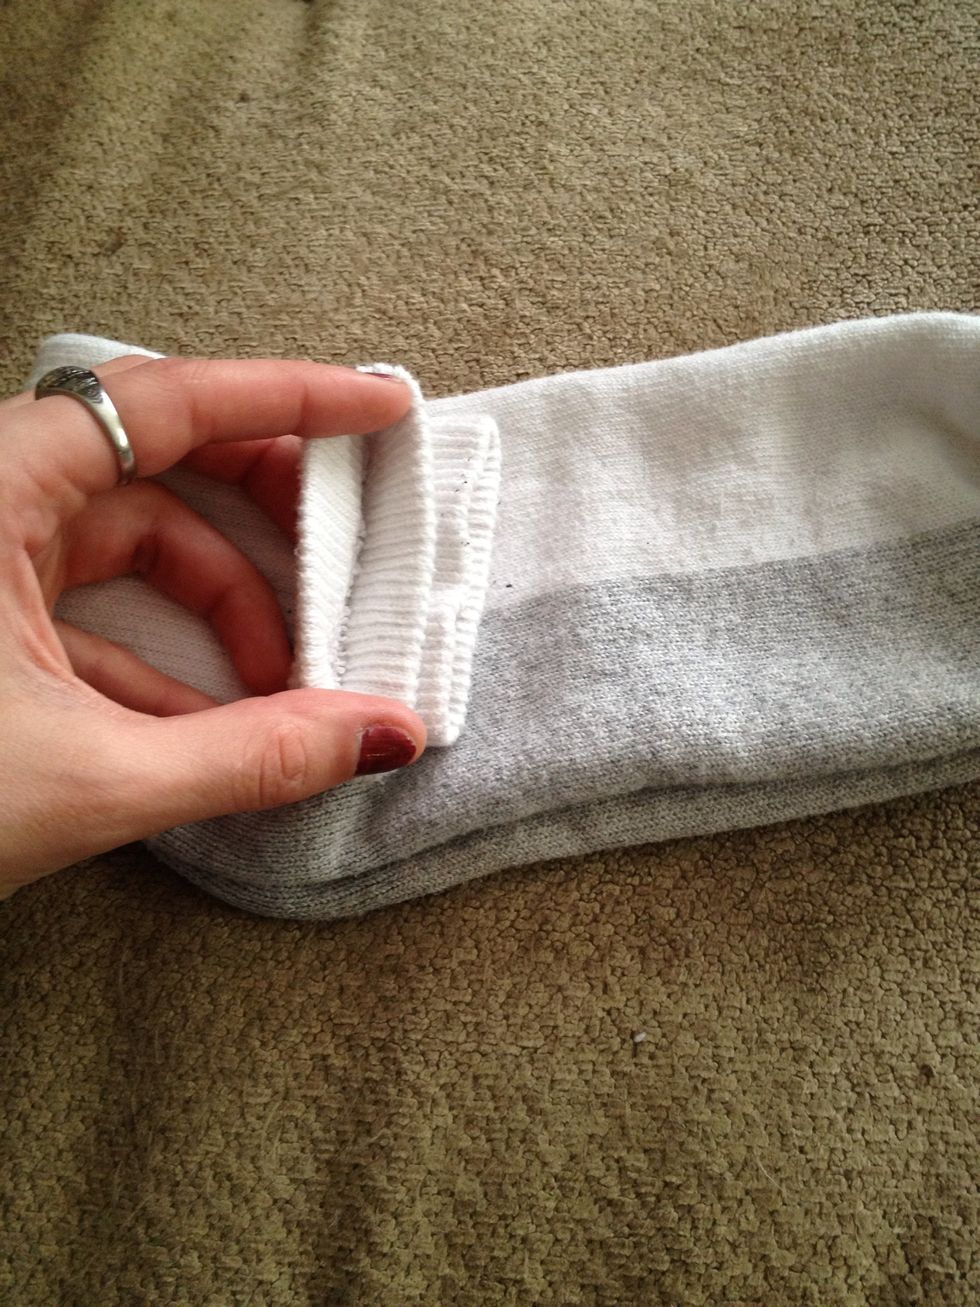 How to properly fold socks - B+C Guides